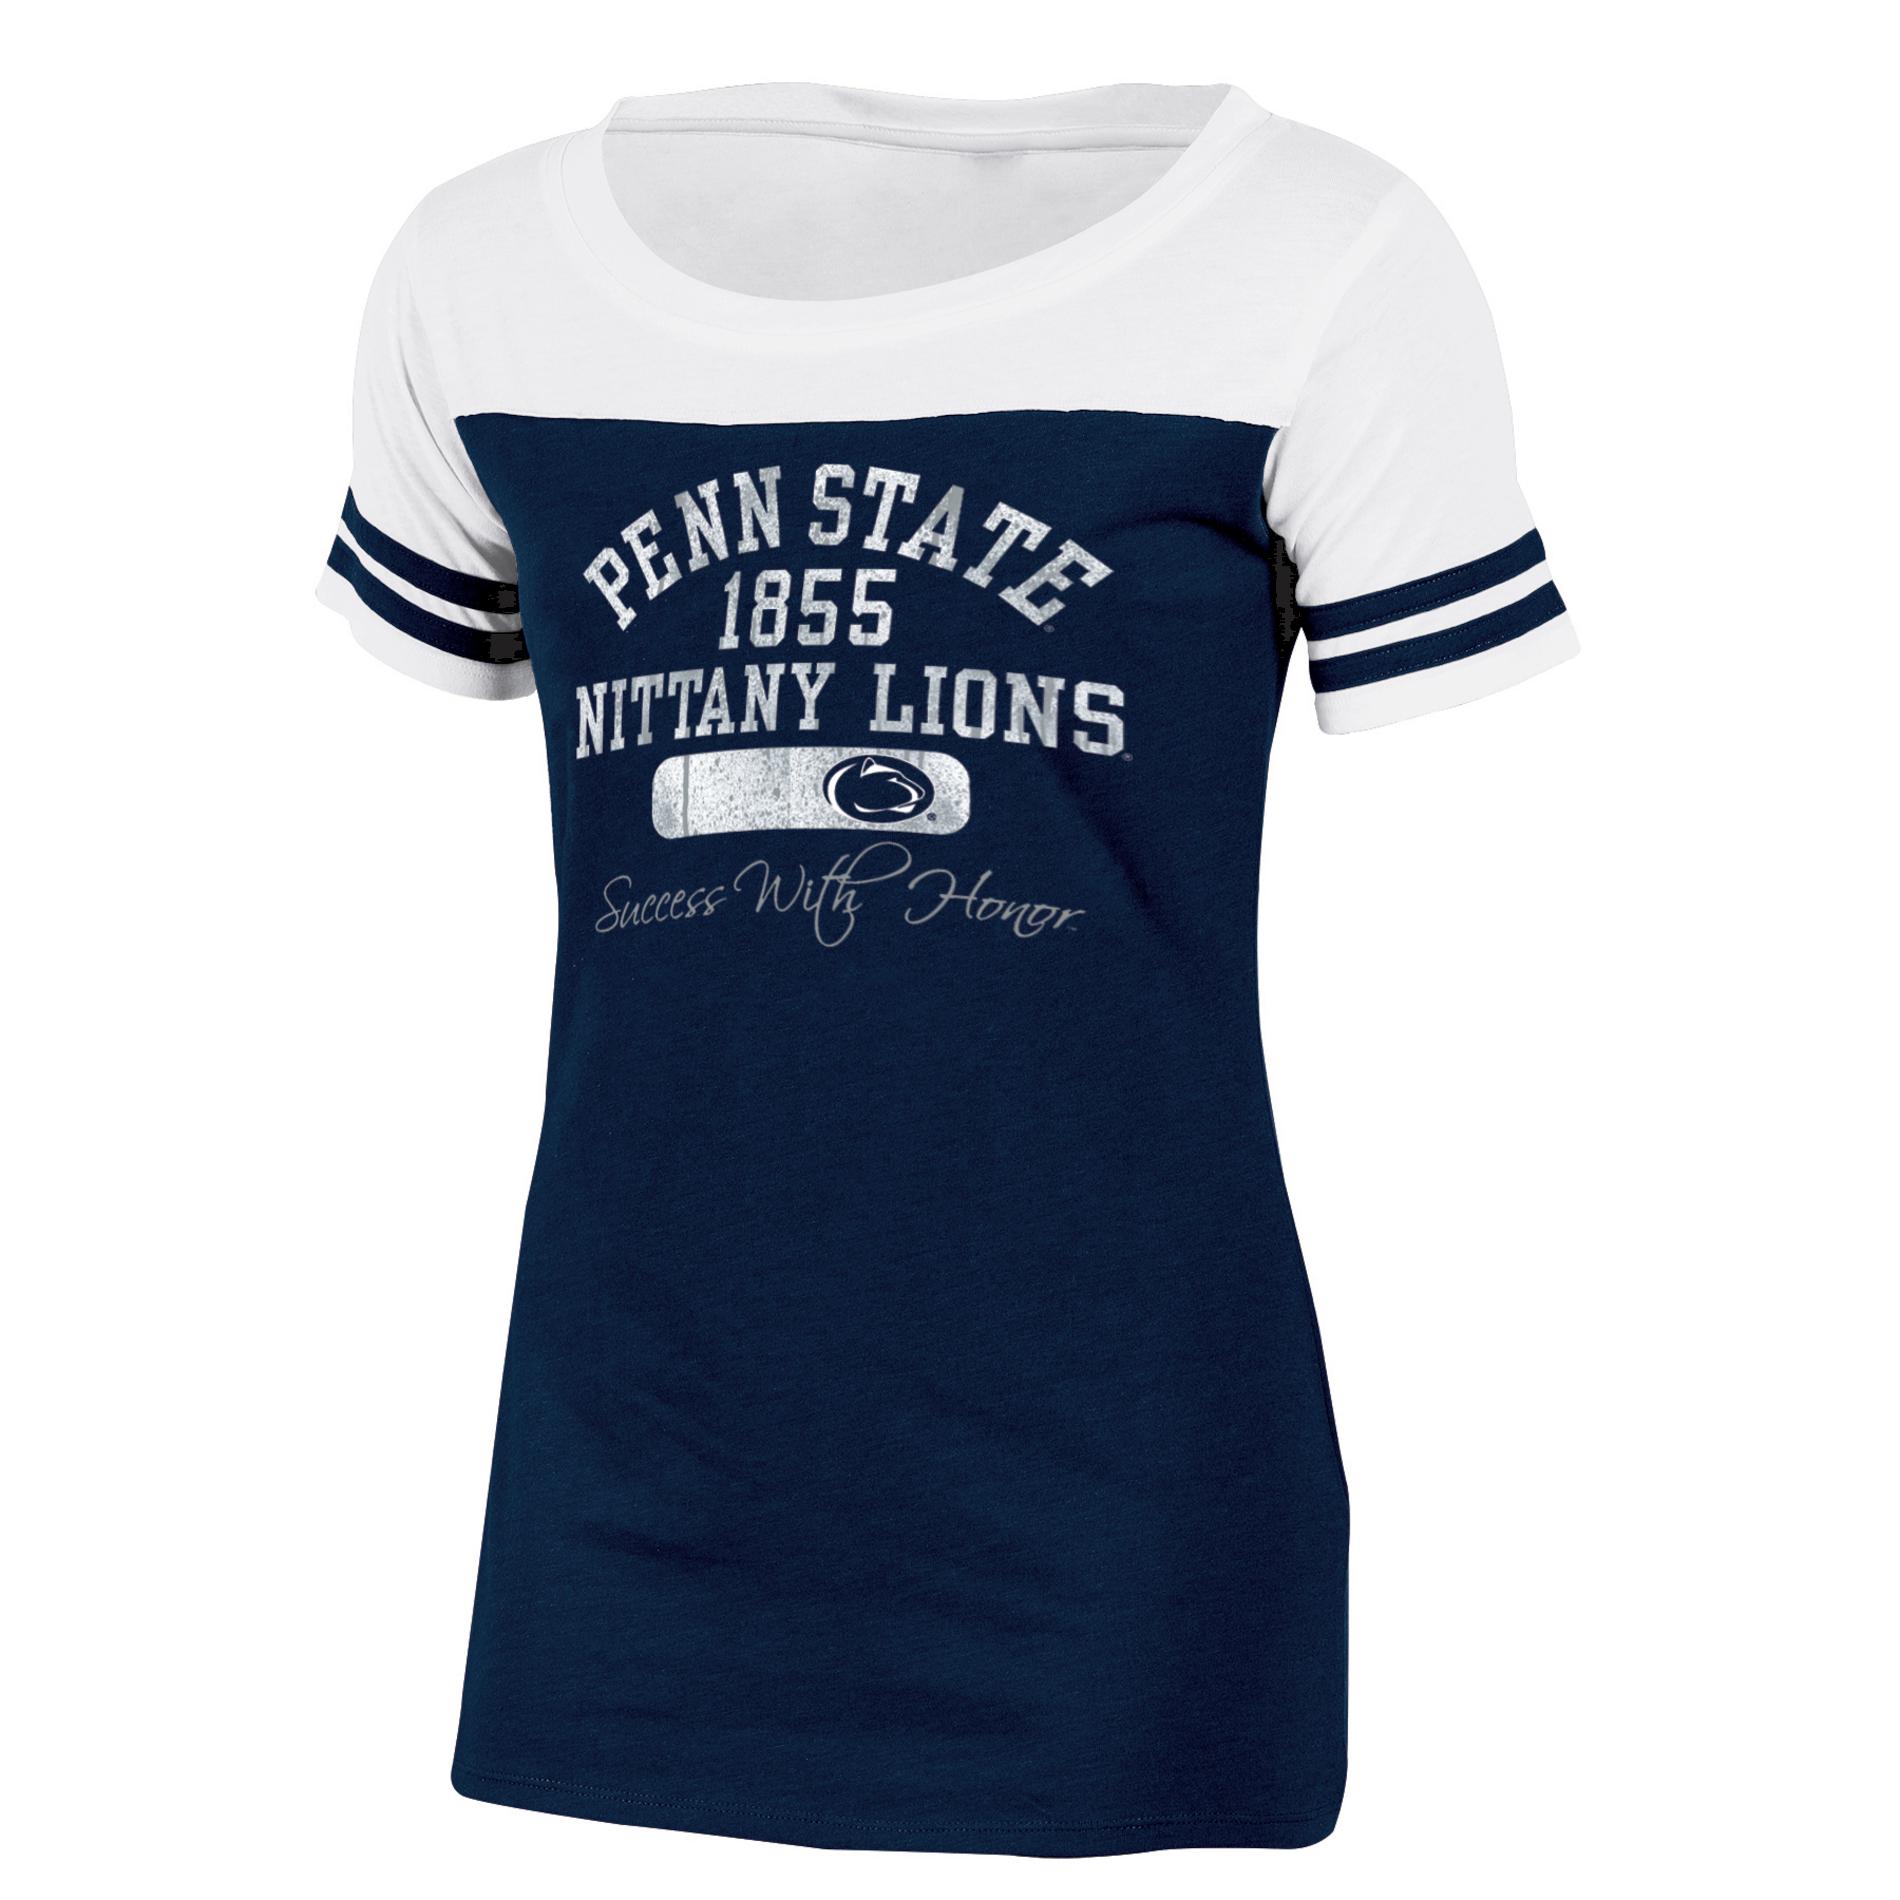 NCAA Women's Wide Neck Tunic - Penn State Nittany Lions